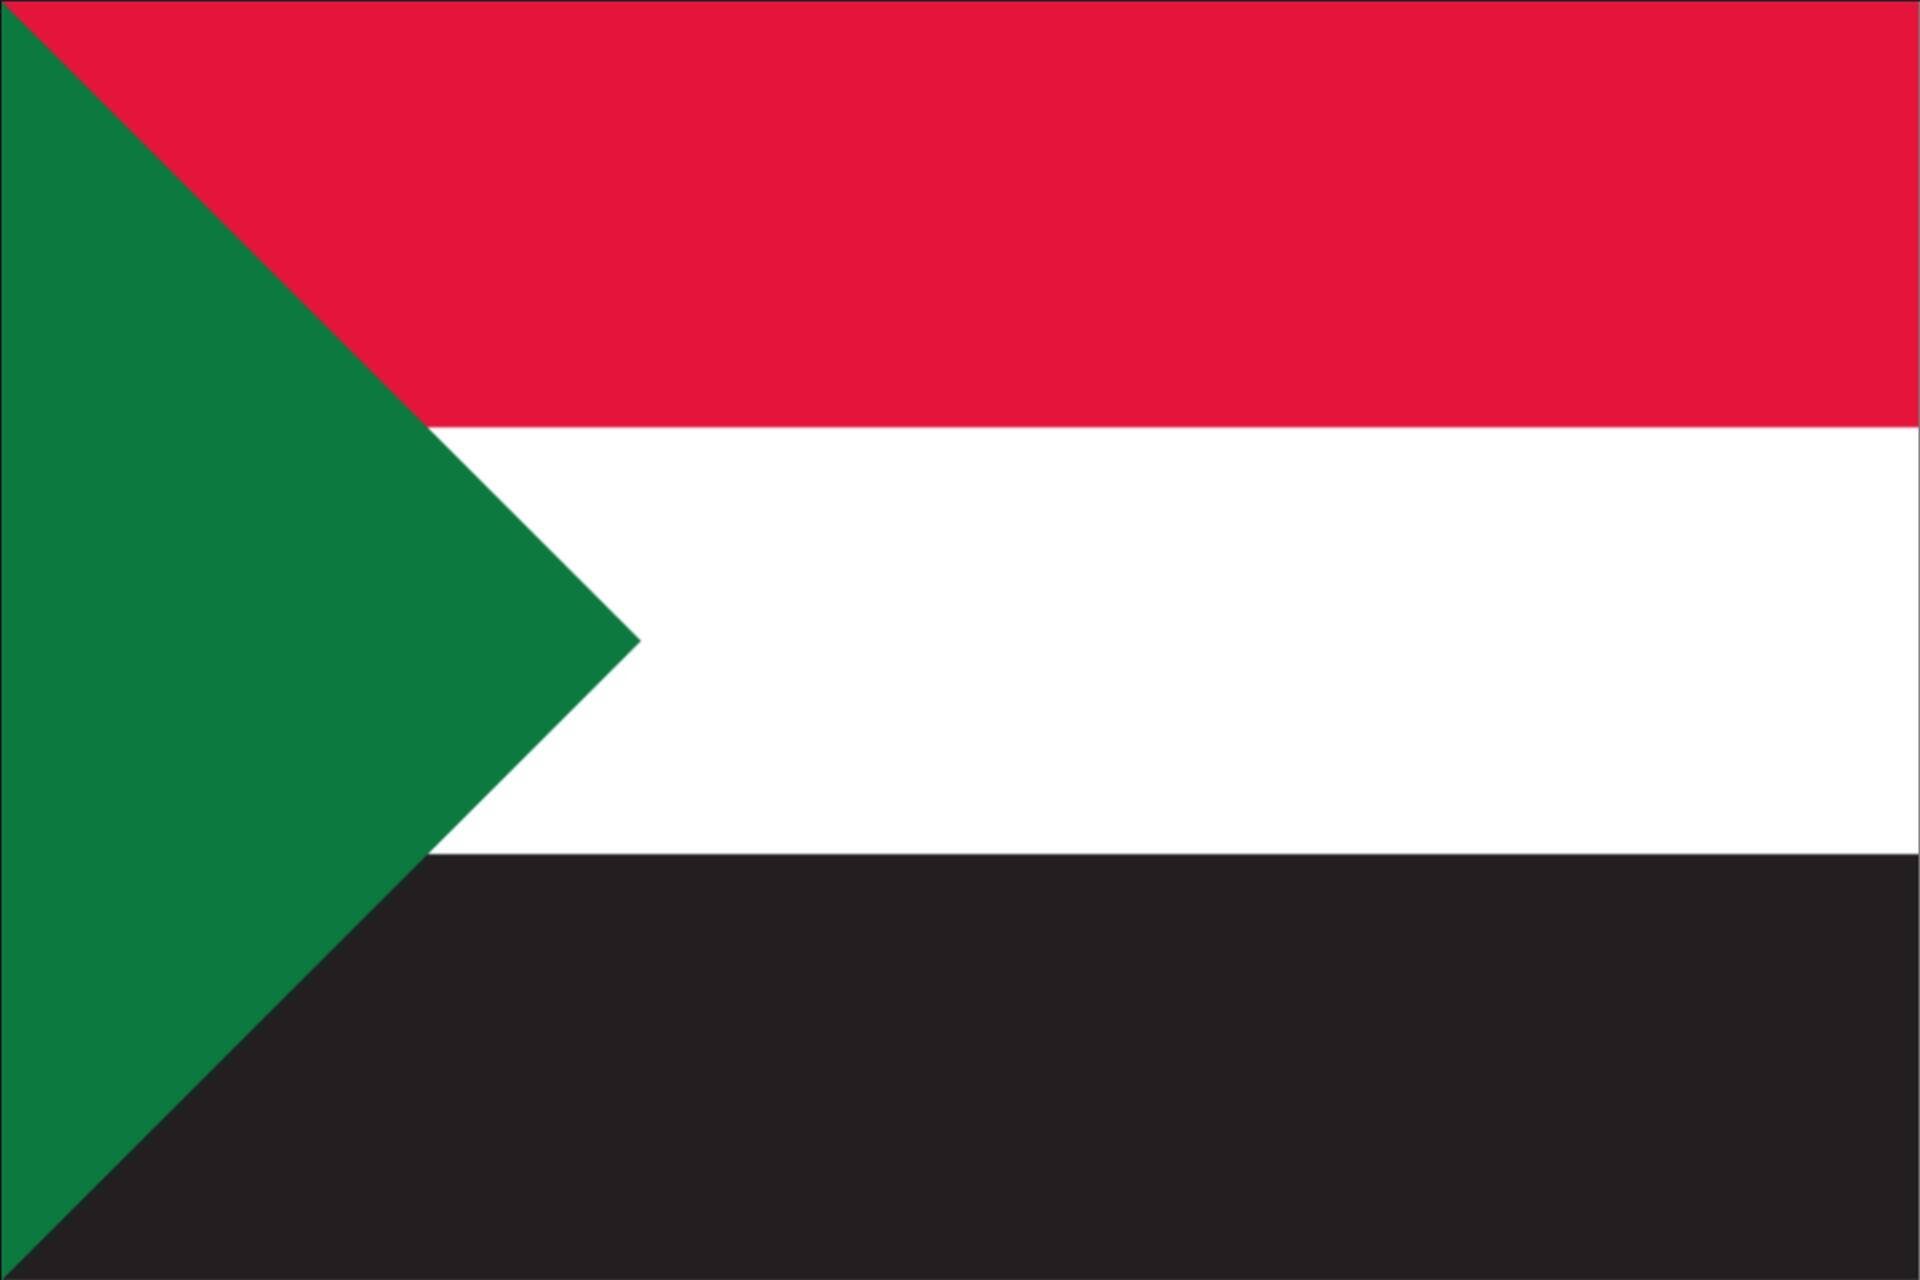 Flagge Flagge 110 g/m² Querformat flaggenmeer Sudan